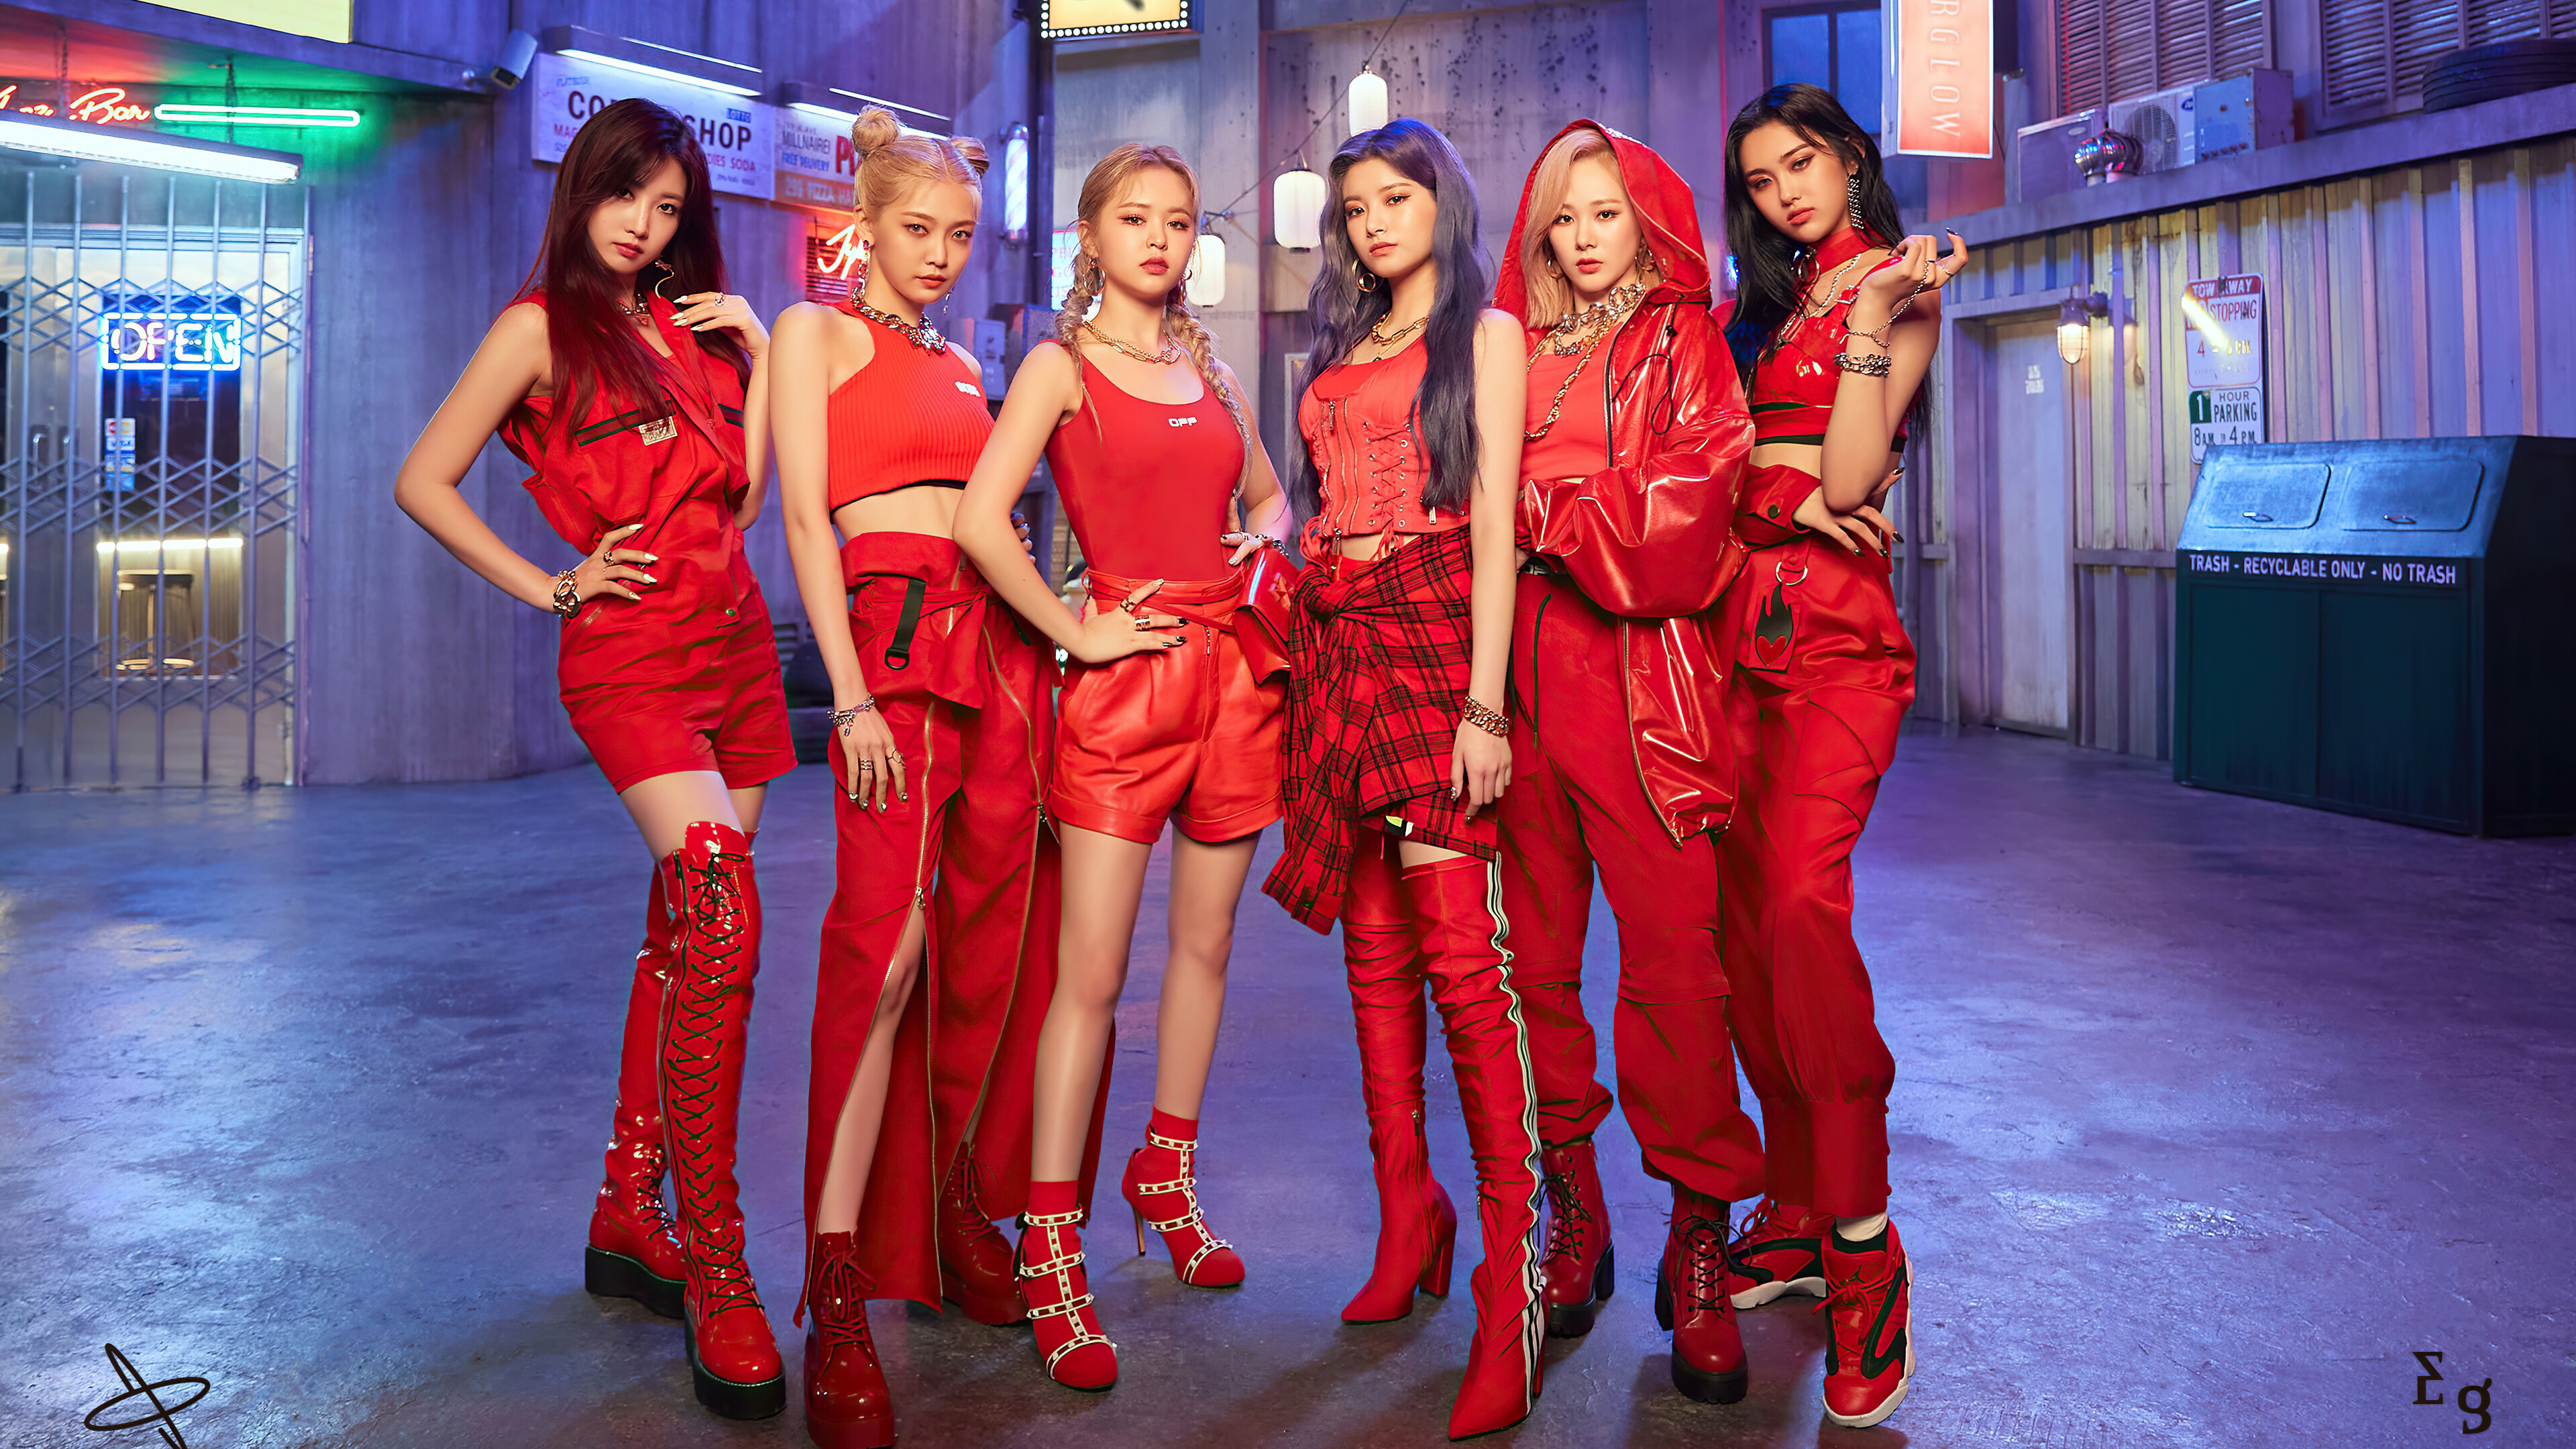 Women Singer K Pop EVERGLOW Red Clothing Neon Boots Red Boots Urban 3840x2160